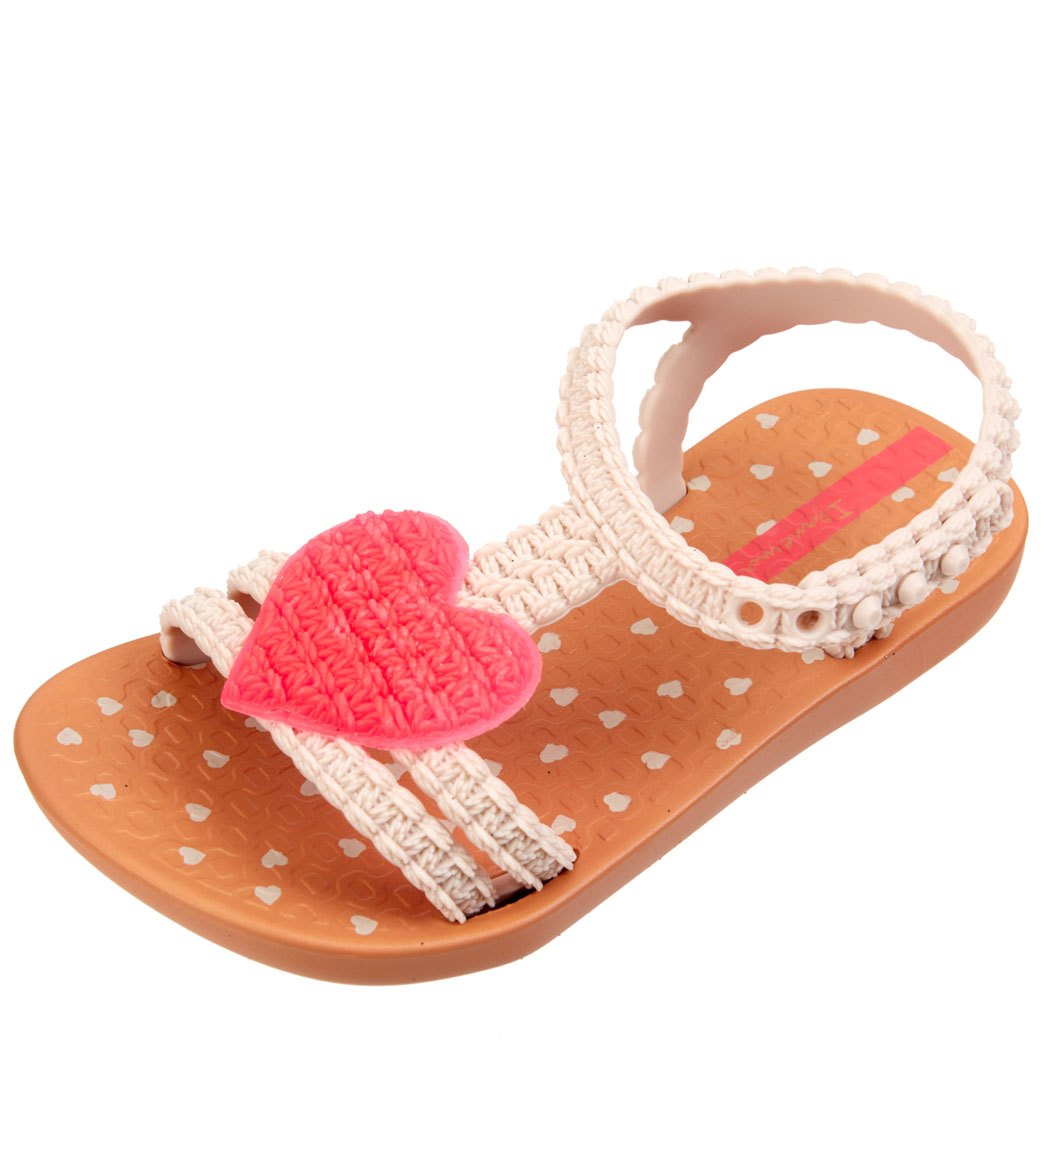 Ipanema Infant My First Sandals - Brown/Pink 6 Plastic - Swimoutlet.com